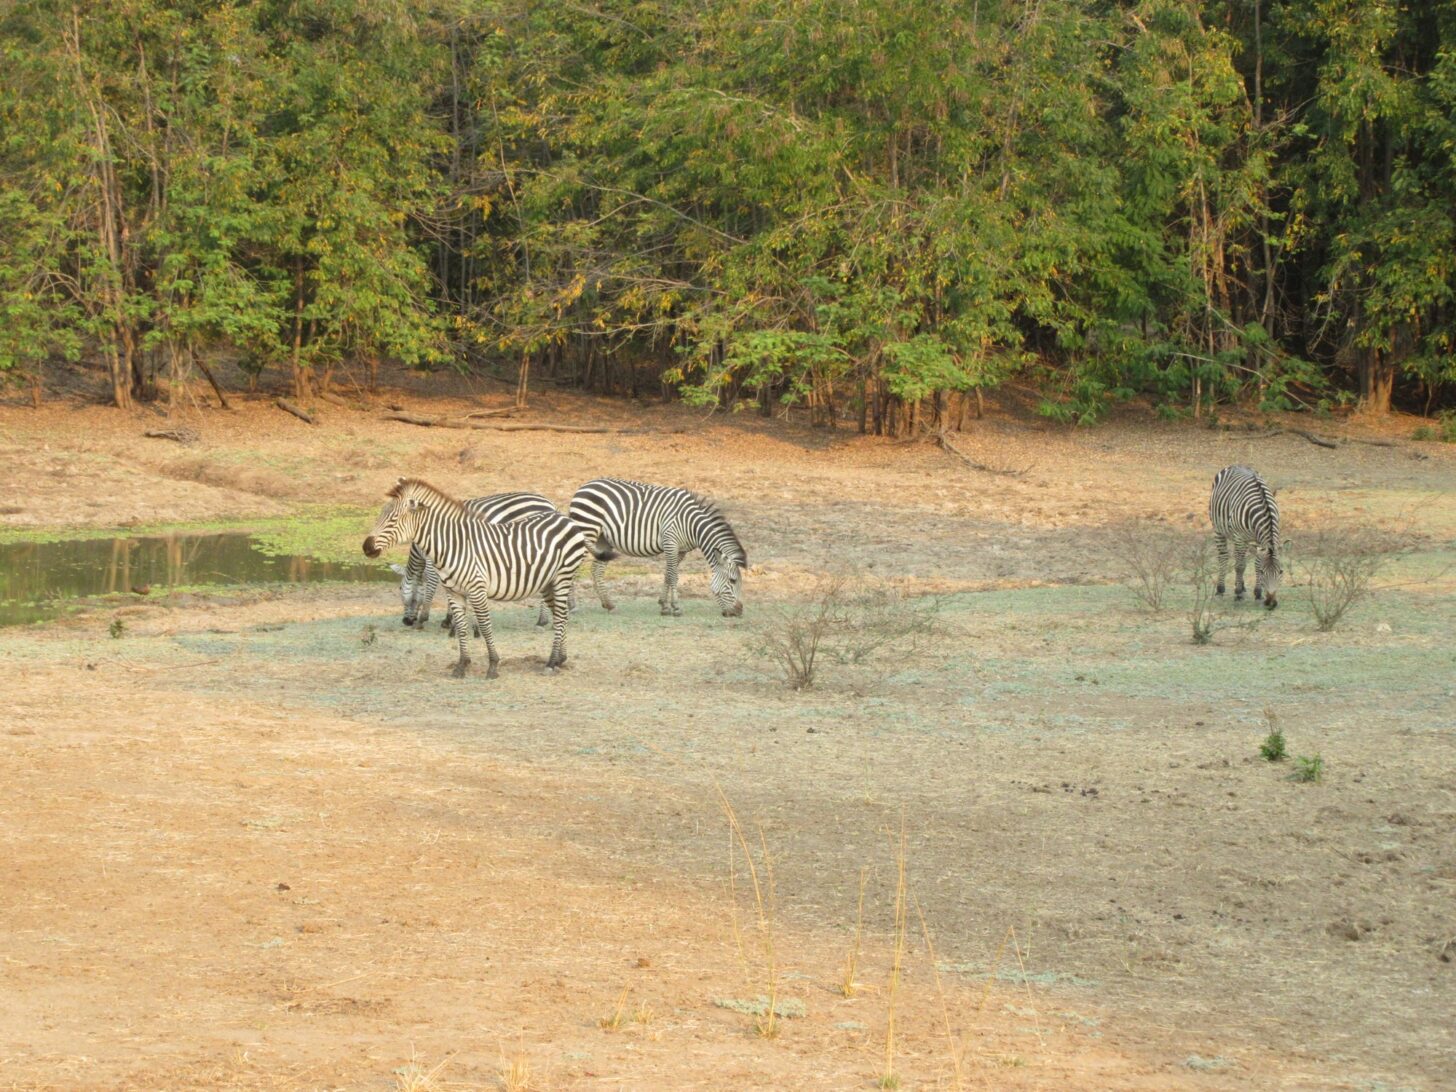 four zebra in a field eating some grass